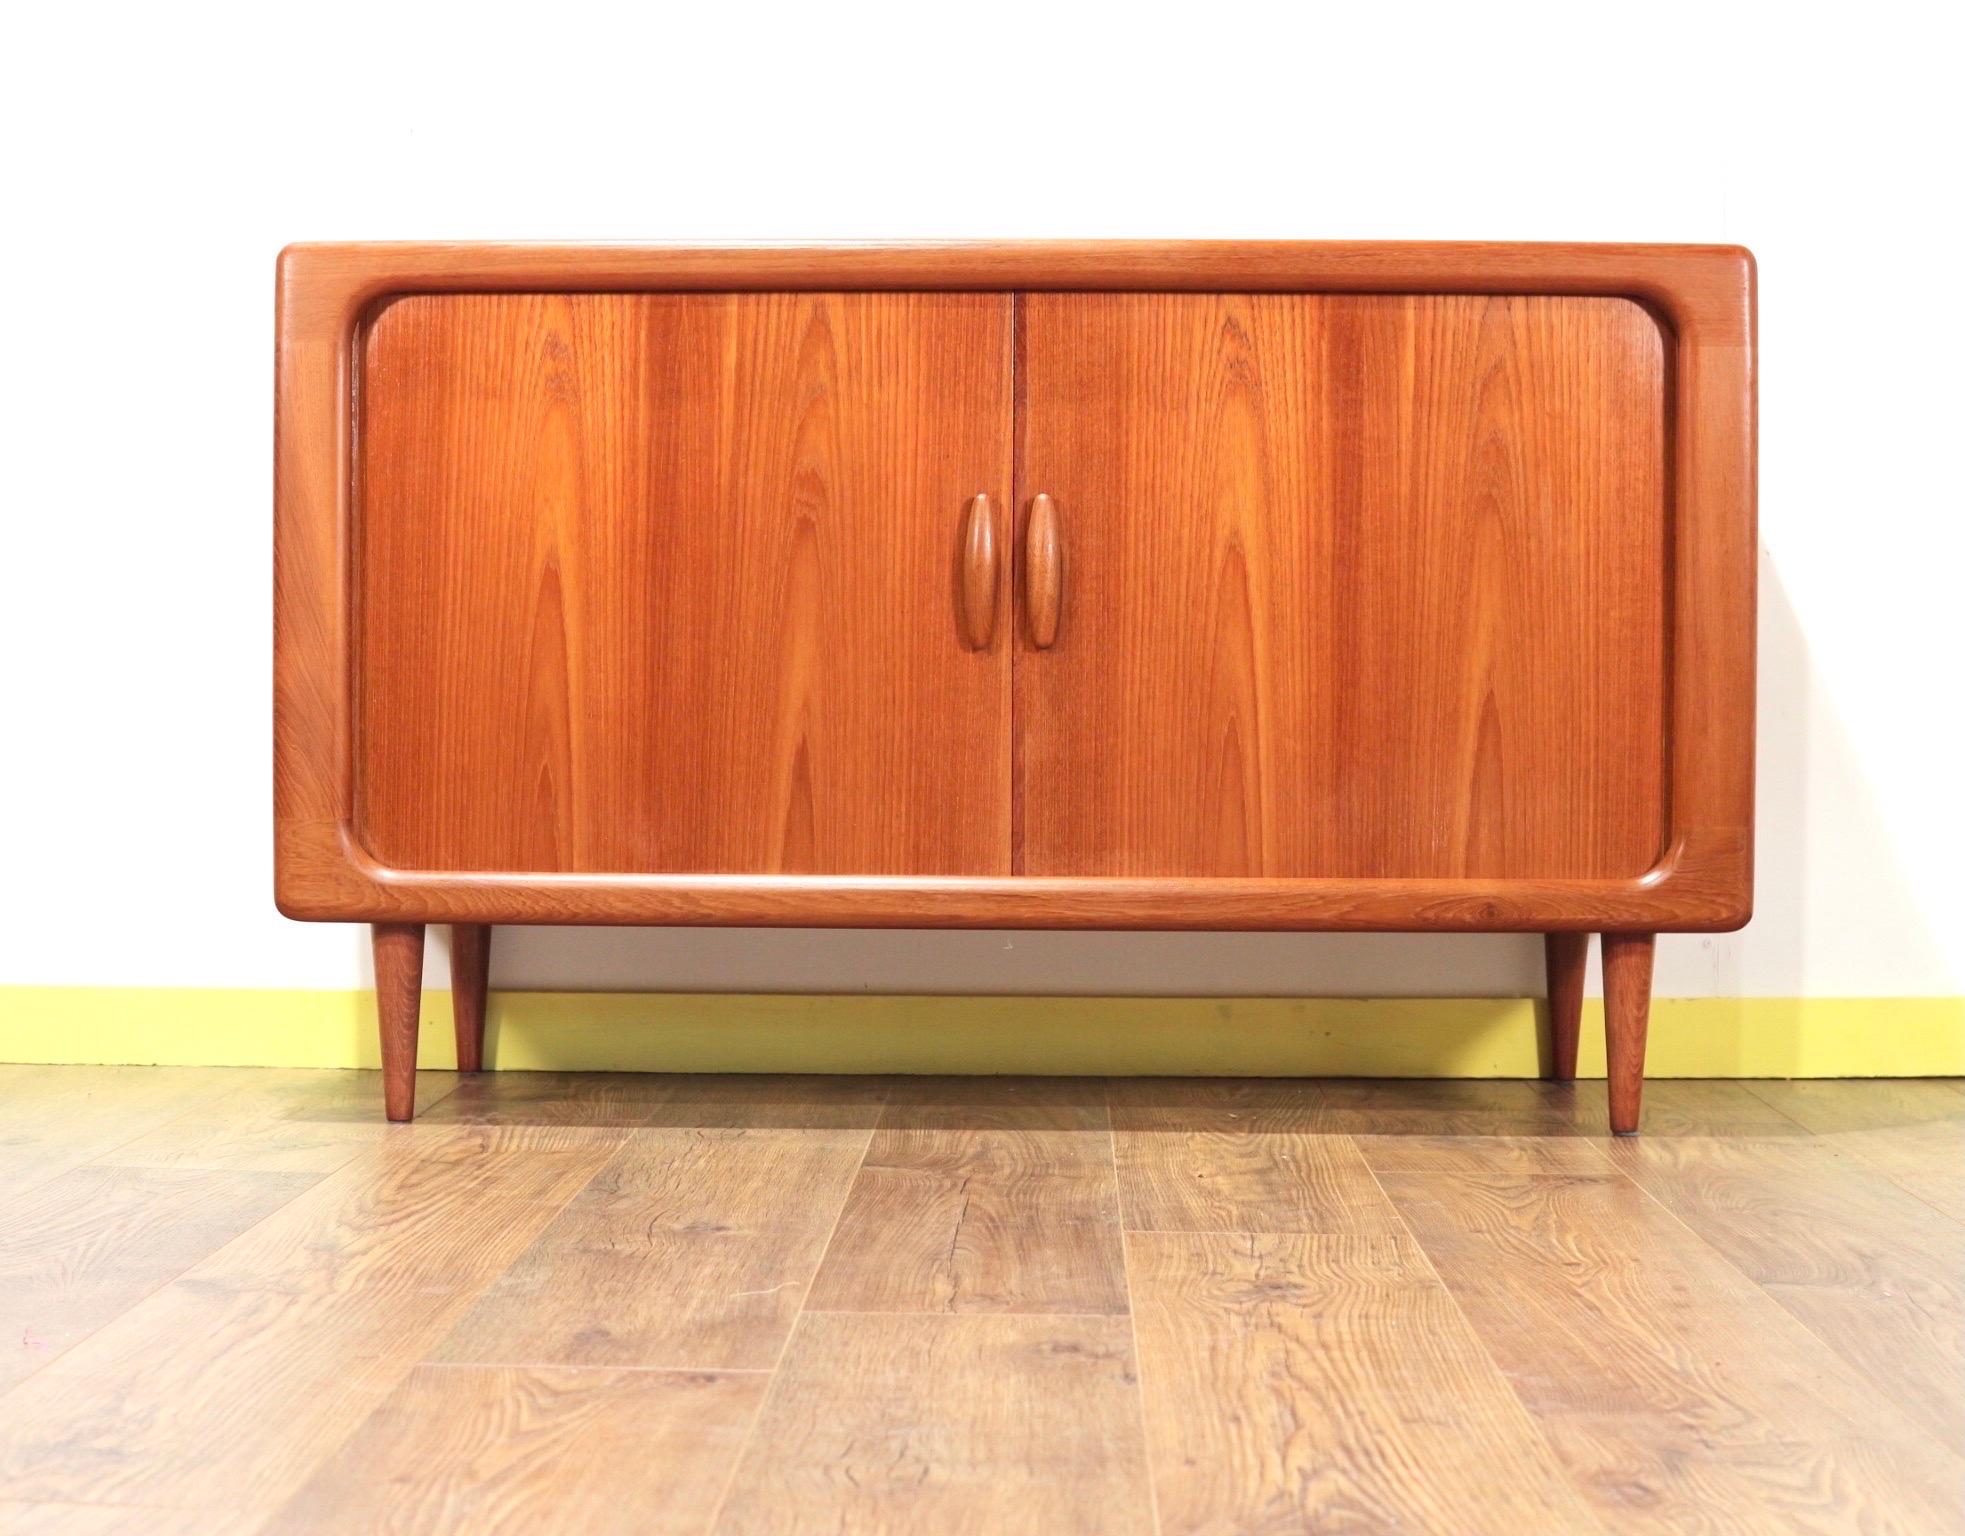 This gorgeous cabinet made by Danish furniture maker Dyrlund is a truly stunning piece. With its tambour doors and striking design it is a true statement piece. Originally used as a drinks cabinet it could have a variety of uses. It would look